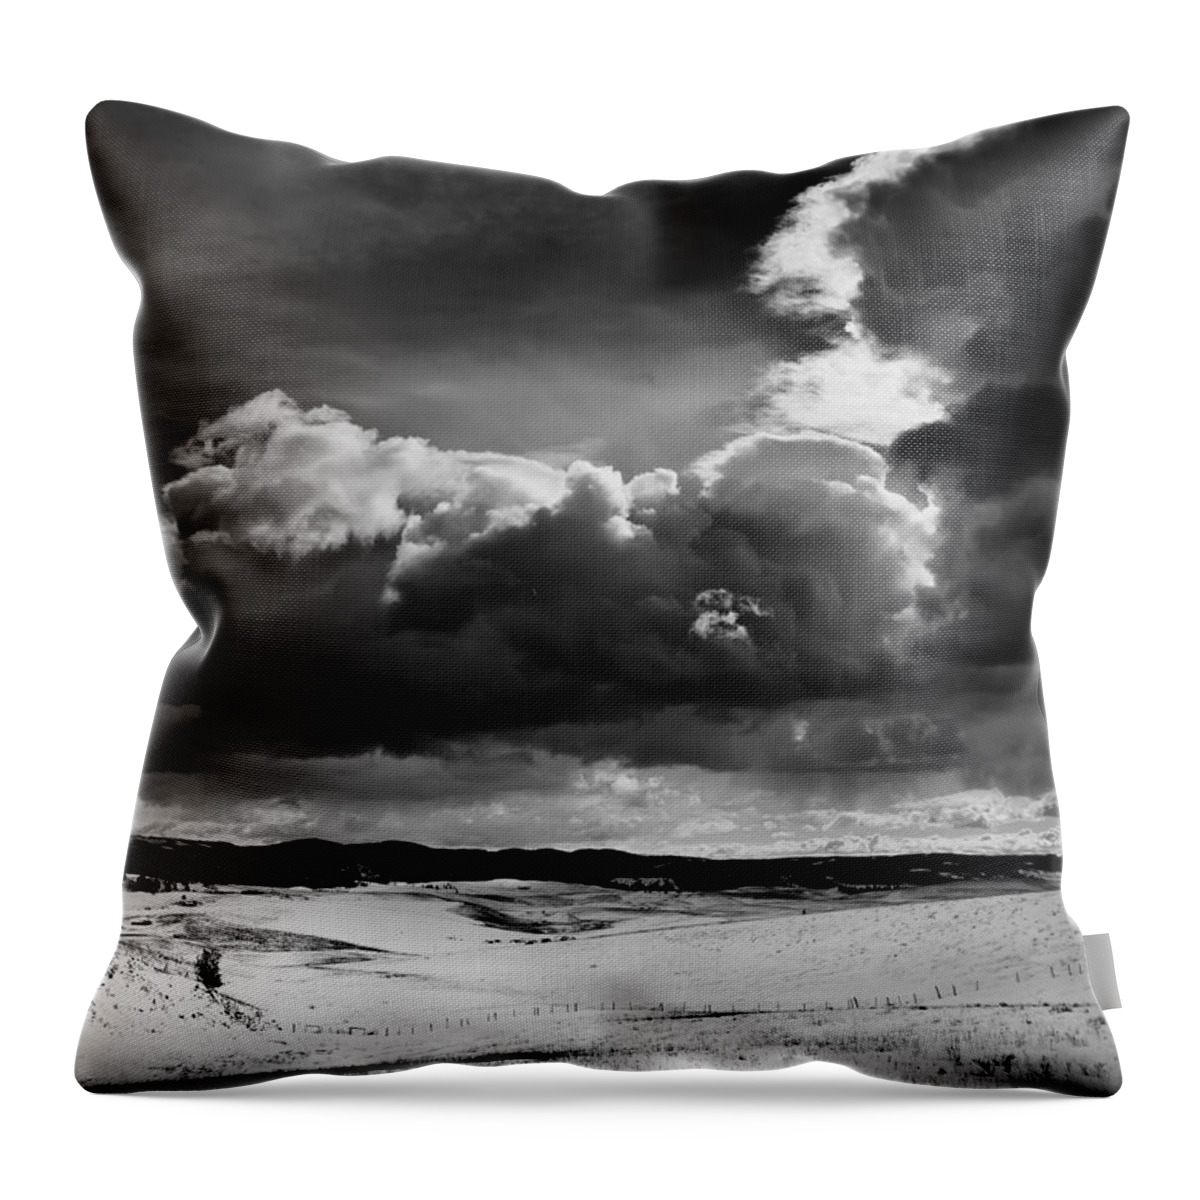 Clouds Throw Pillow featuring the photograph Dark Clouds Over Snowy Landscape by Theresa Tahara